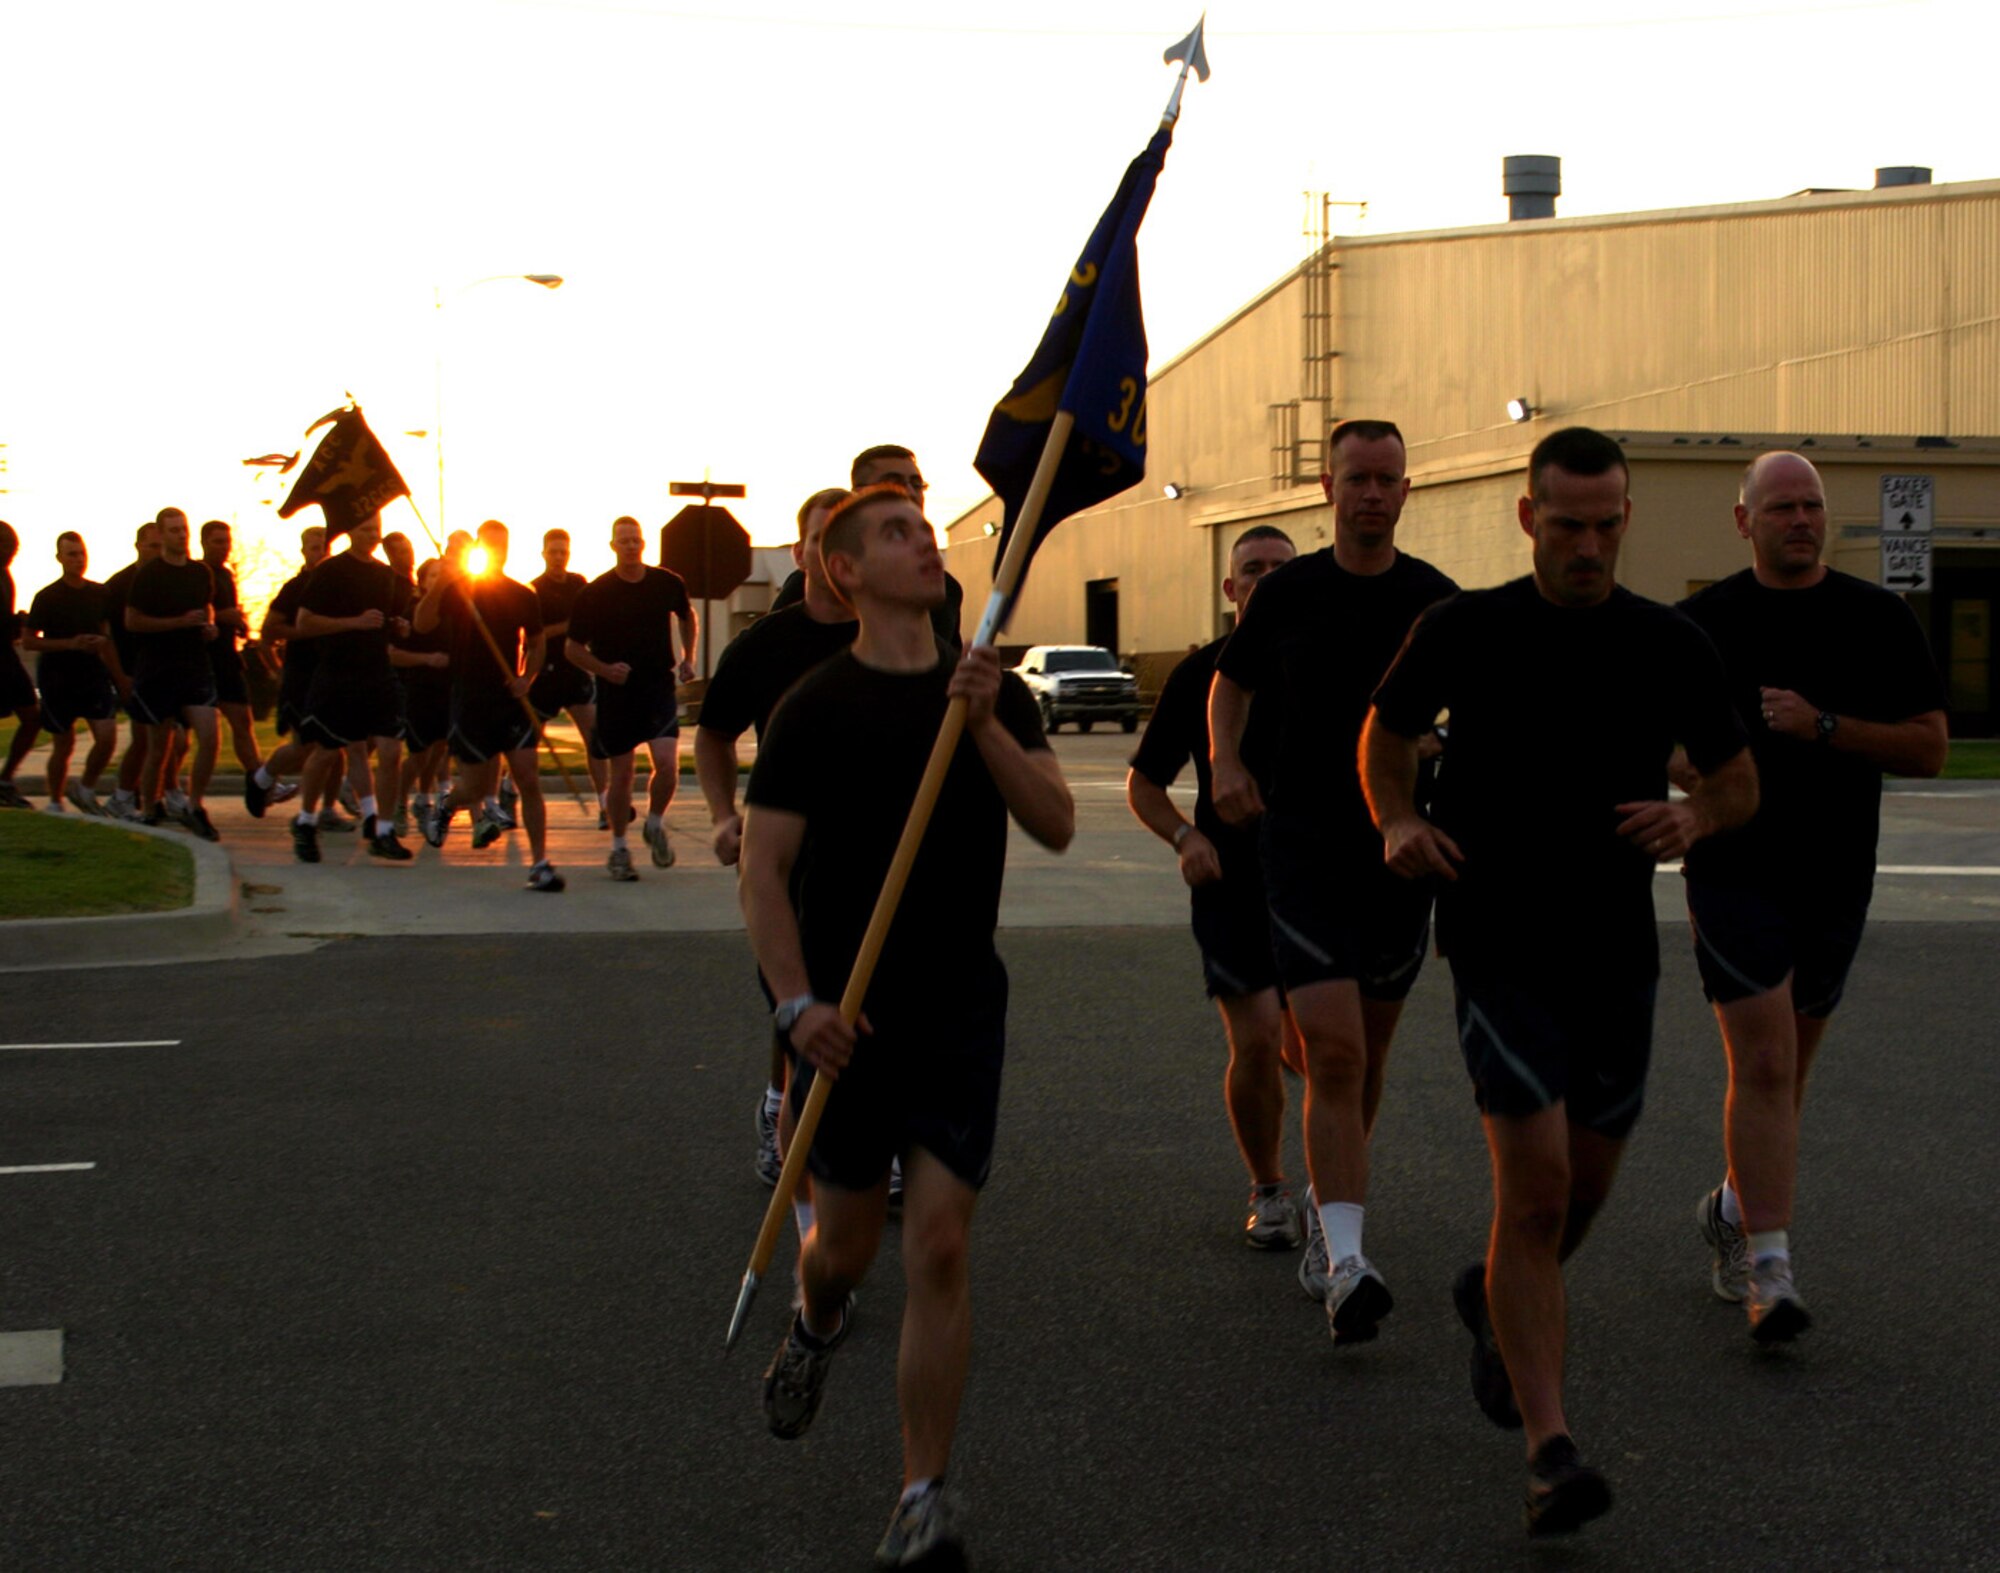 Airmen begin their 5K run as the sun rises on the second annual Prisoner of War/Missing In Action Memorial Run Sept. 28.  About 1,500 Airmen across Tinker participated in the event, which began at the POW/MIA memorial in the Tinker Air Park, wound through the base and ended on the 72nd Air Base Wing headquarters lawn.  (Photo by Staff Sgt. Stacy Fowler)